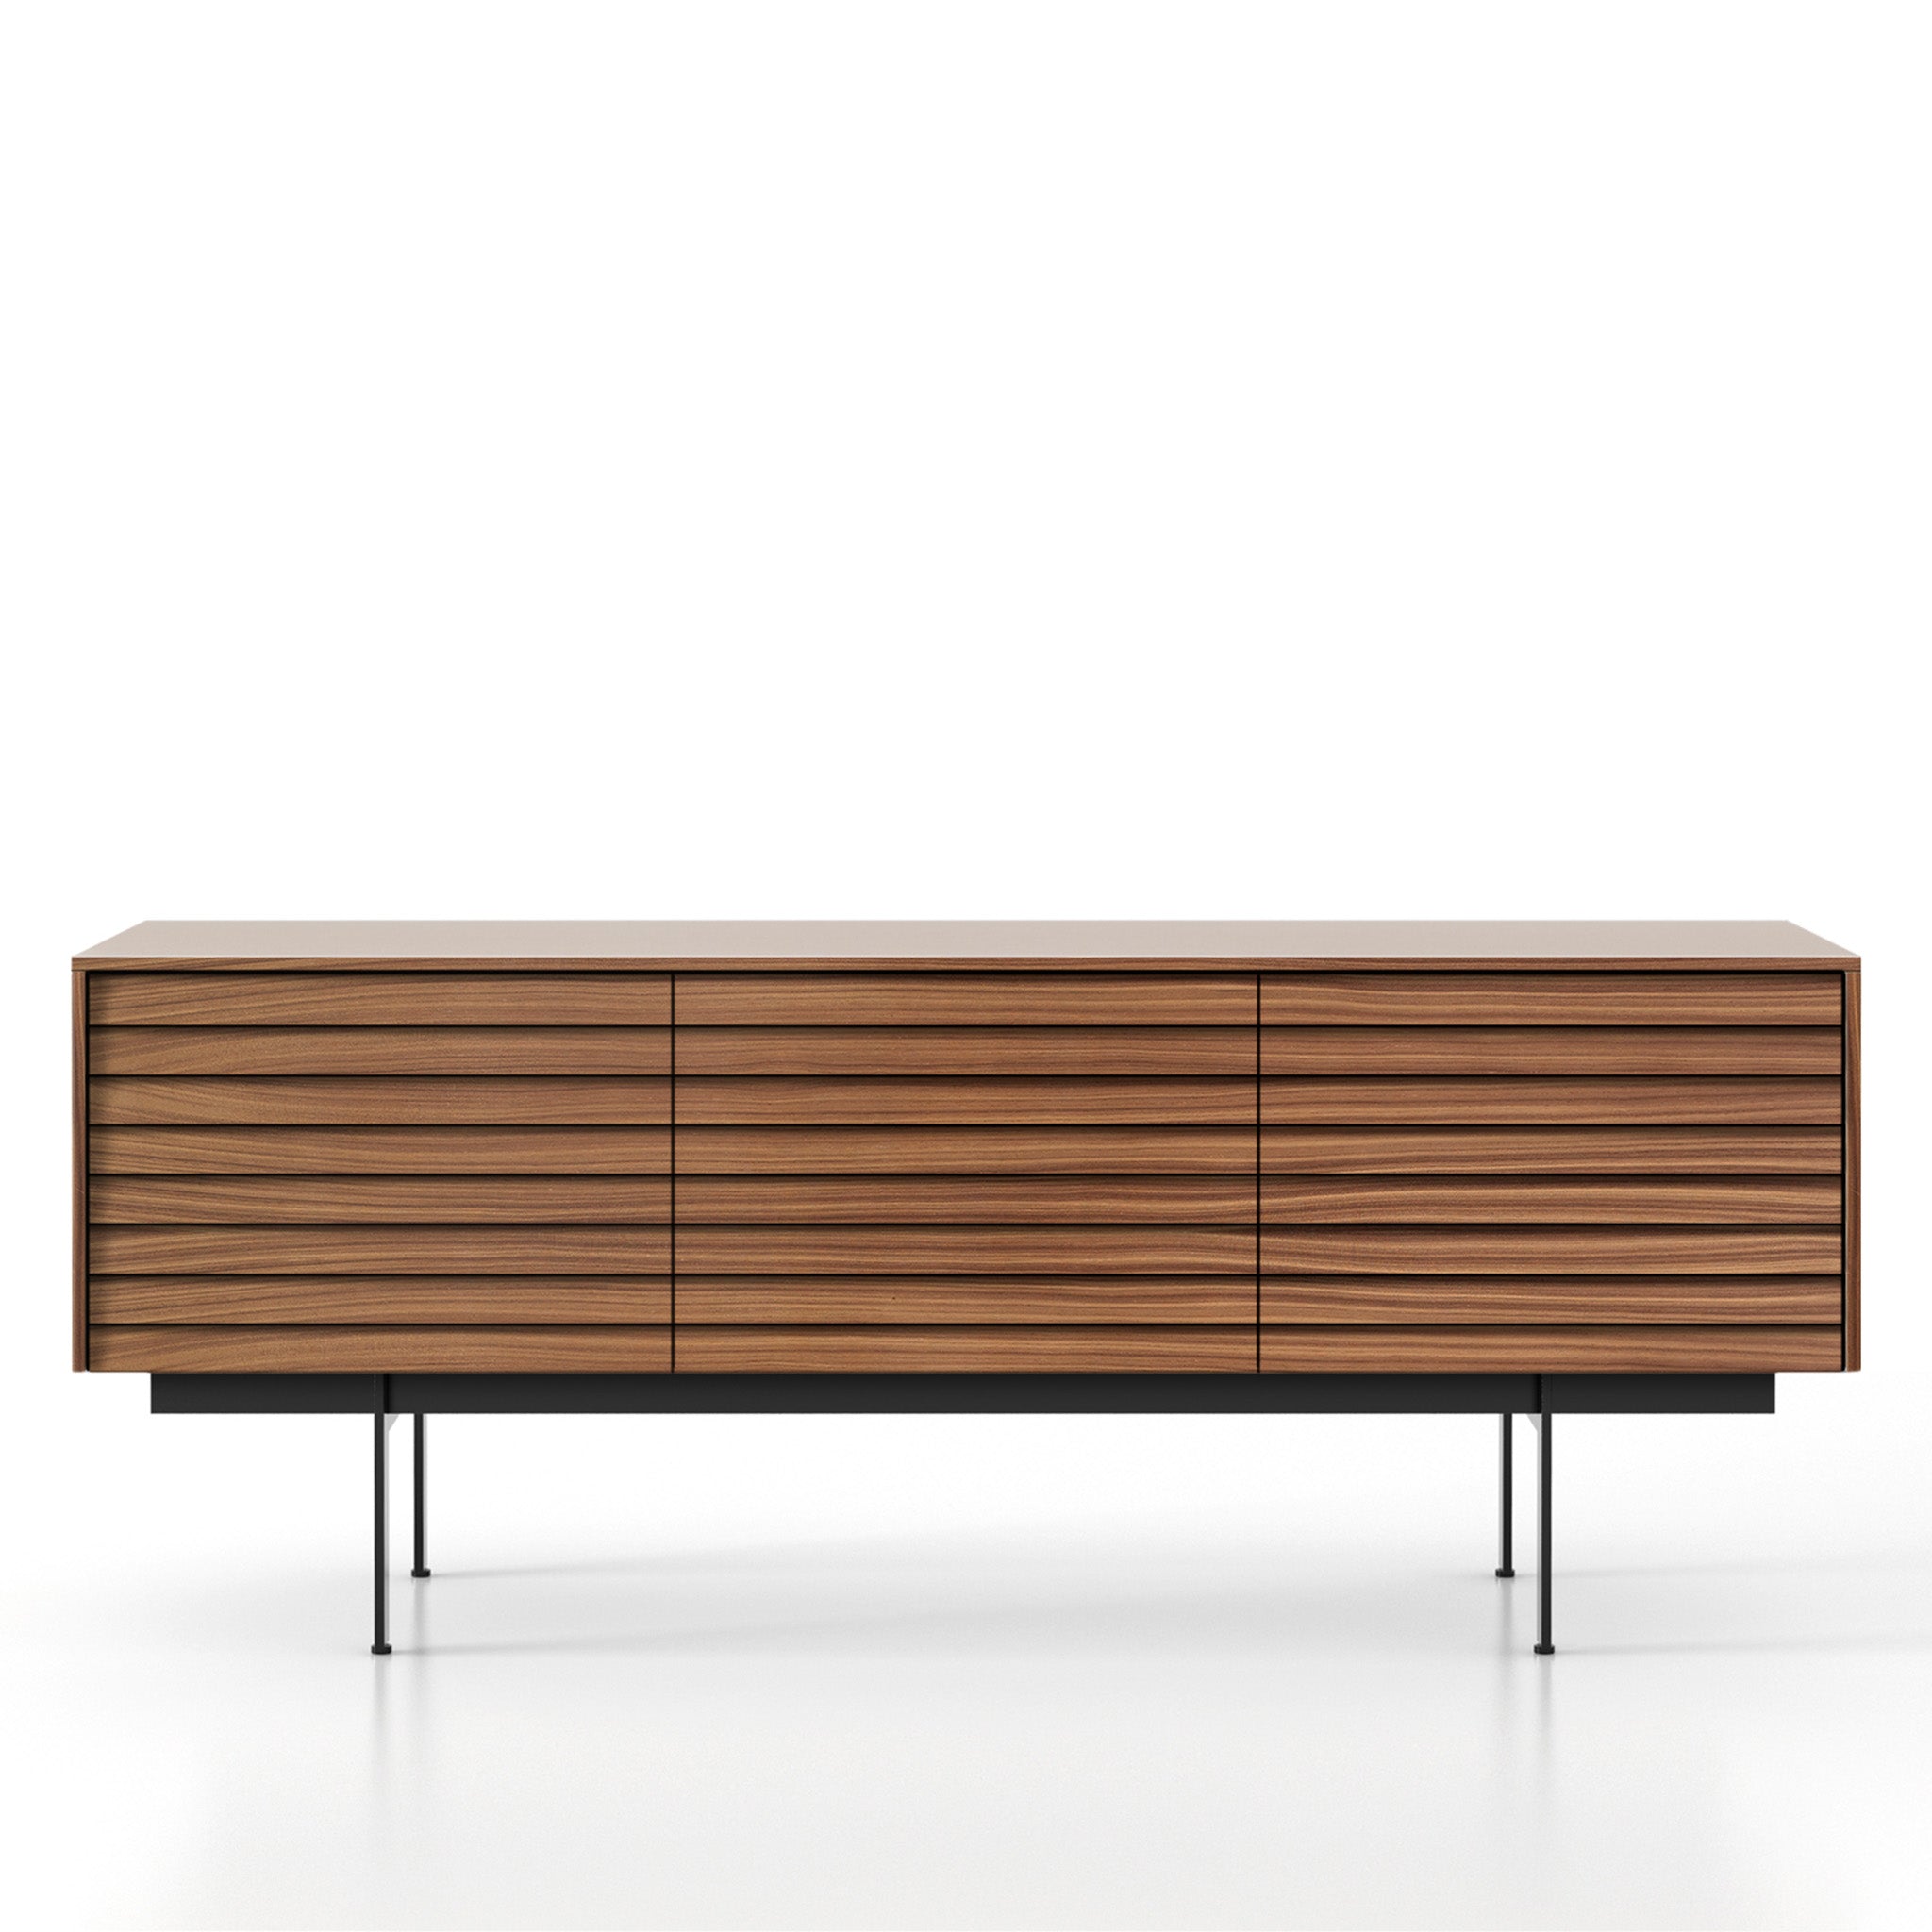 Sussex Sideboard by Punt